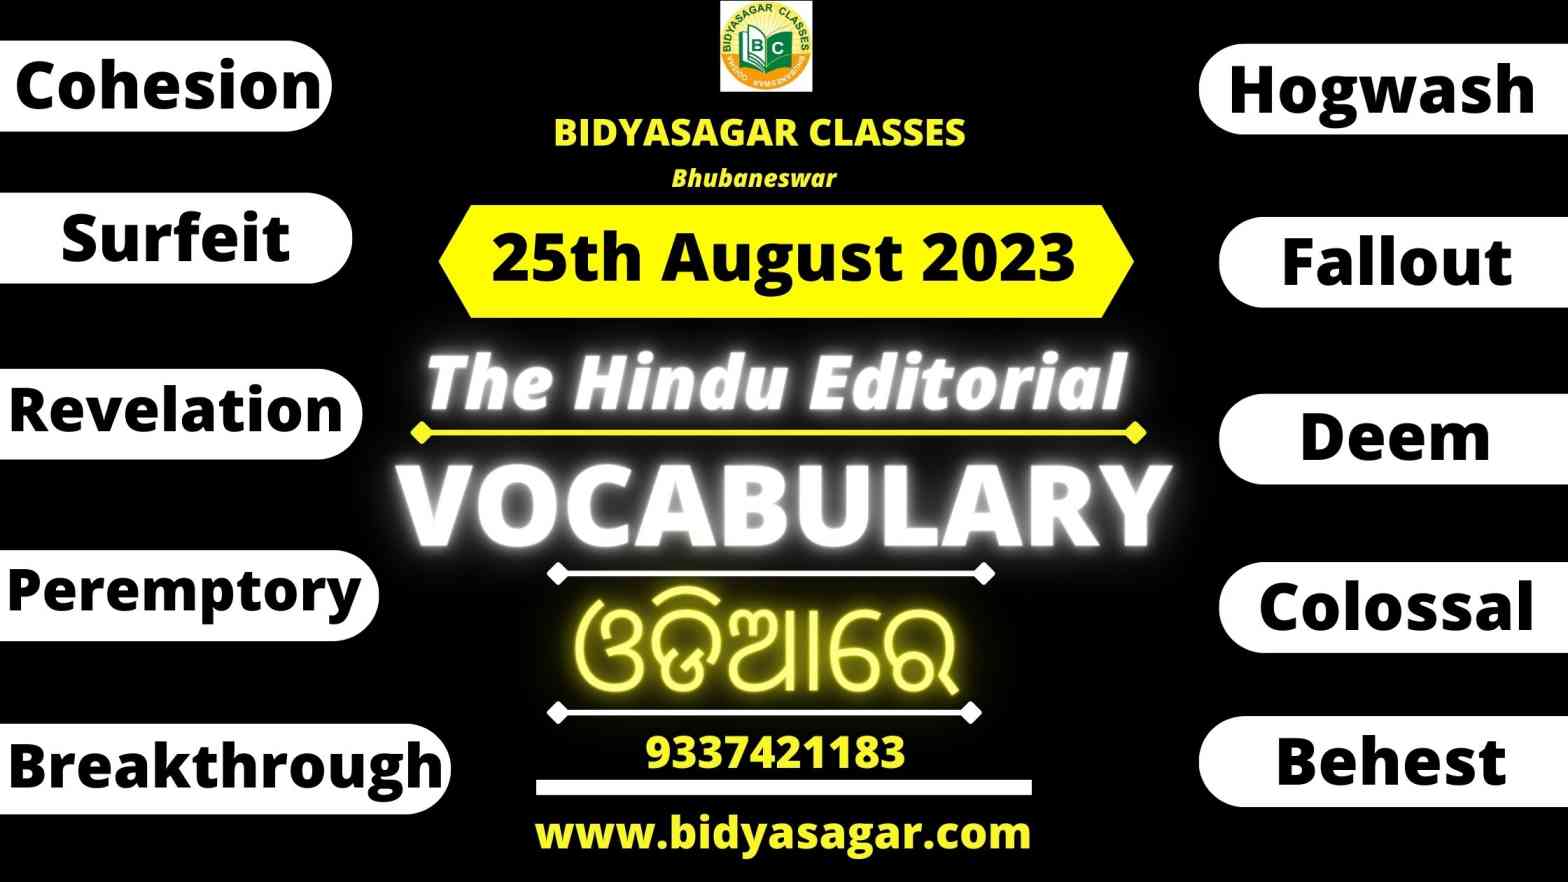 The Hindu Editorial Vocabulary of 25th August 2023